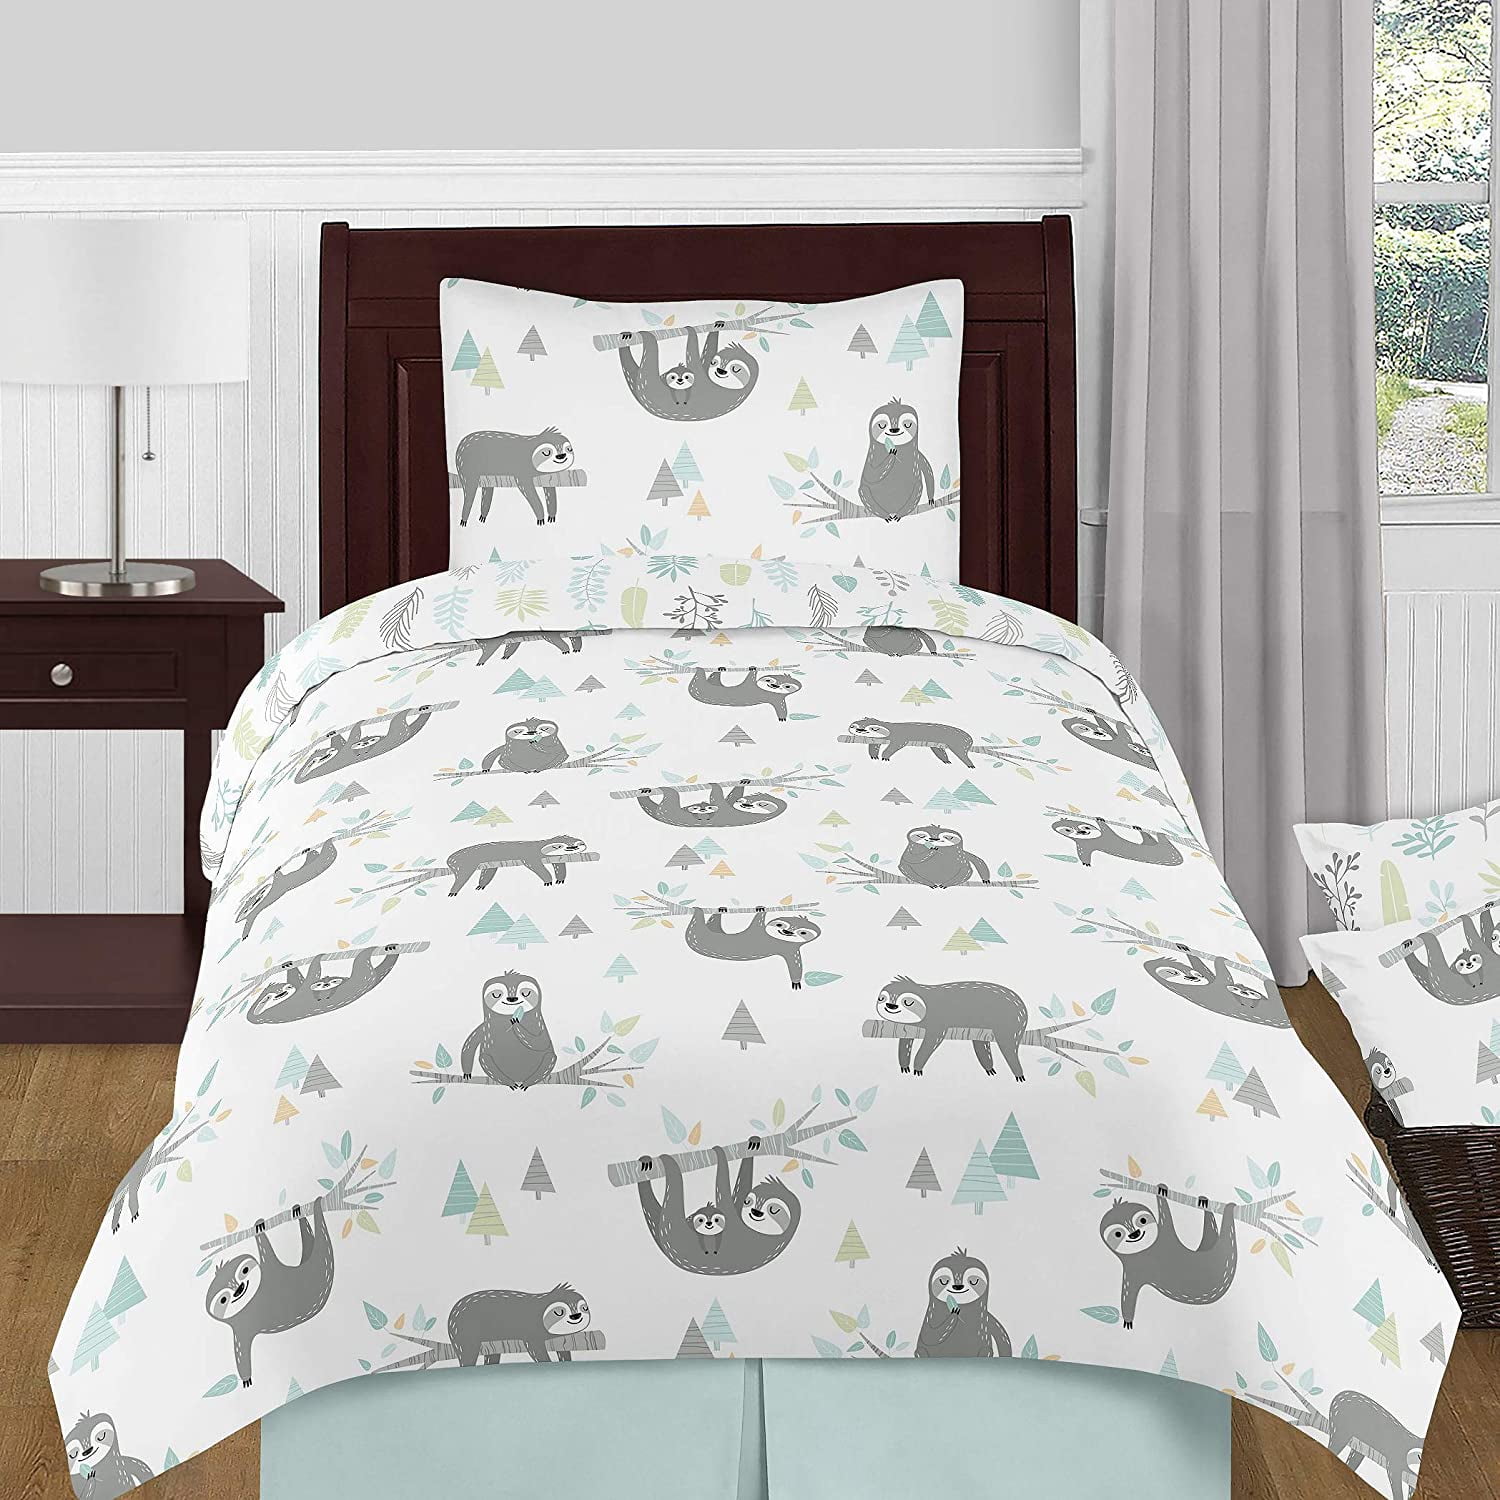 Turquoise Gray and Green Botanical Rainforest Sweet Jojo Designs Blue and Grey Jungle Sloth Leaf Unisex Boy or Girl Baby Nursery Musical Crib Mobile